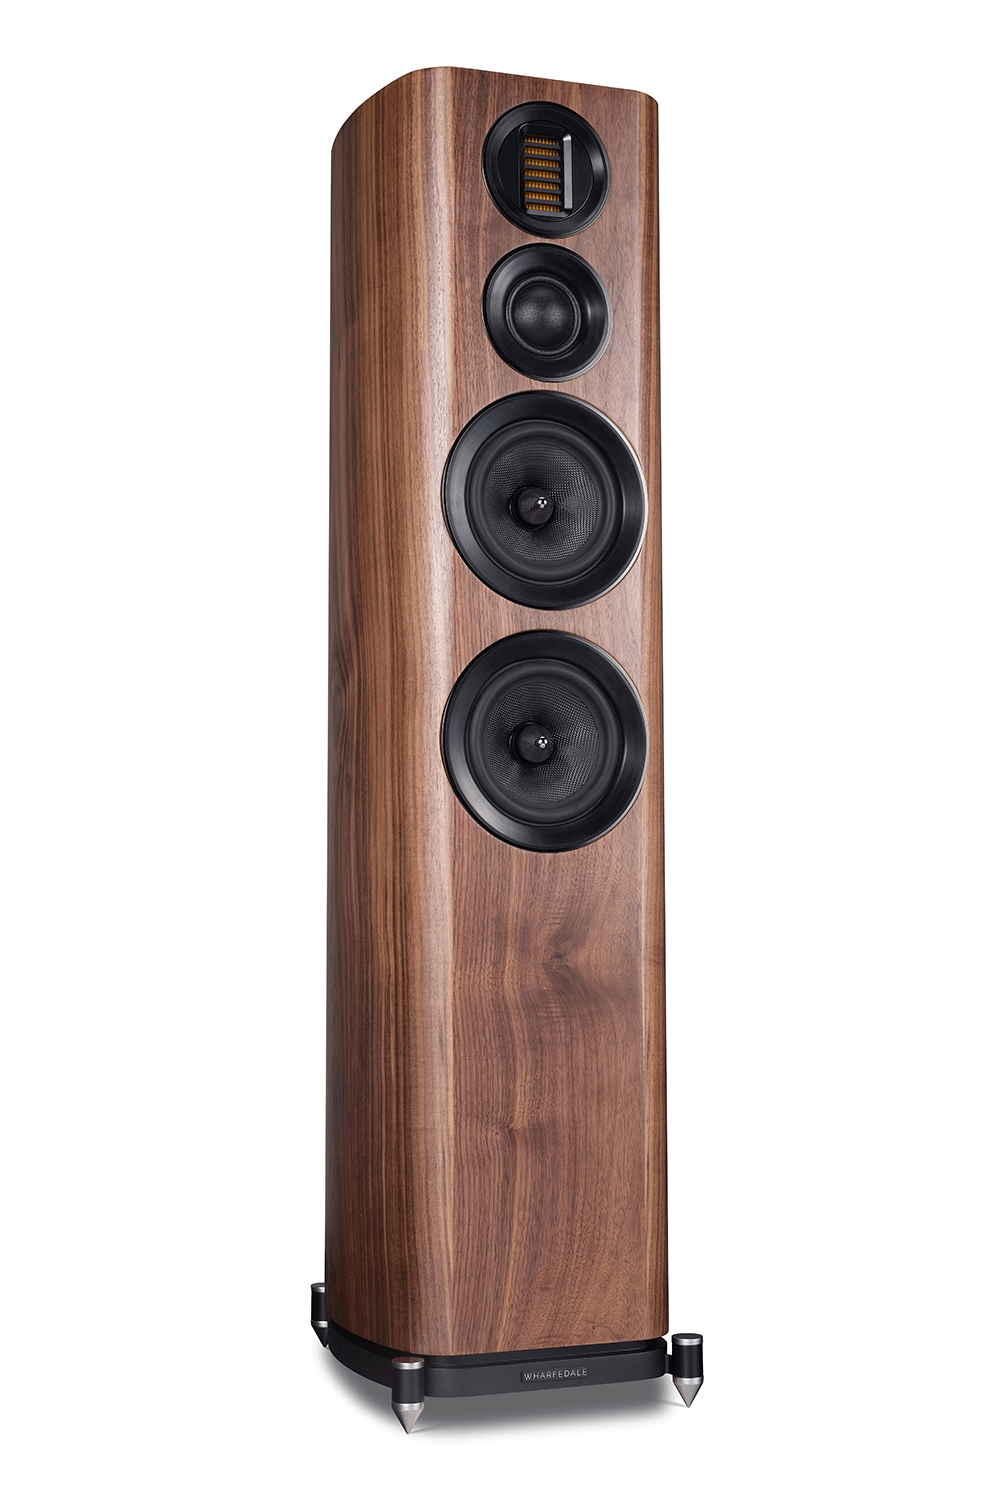 Wharfedale’s new EVO 4 has grown out of the extensive research and development that produced the ELYSIAN flagship loudspeakers and borrows much of the technology involved in ELYSIAN. 